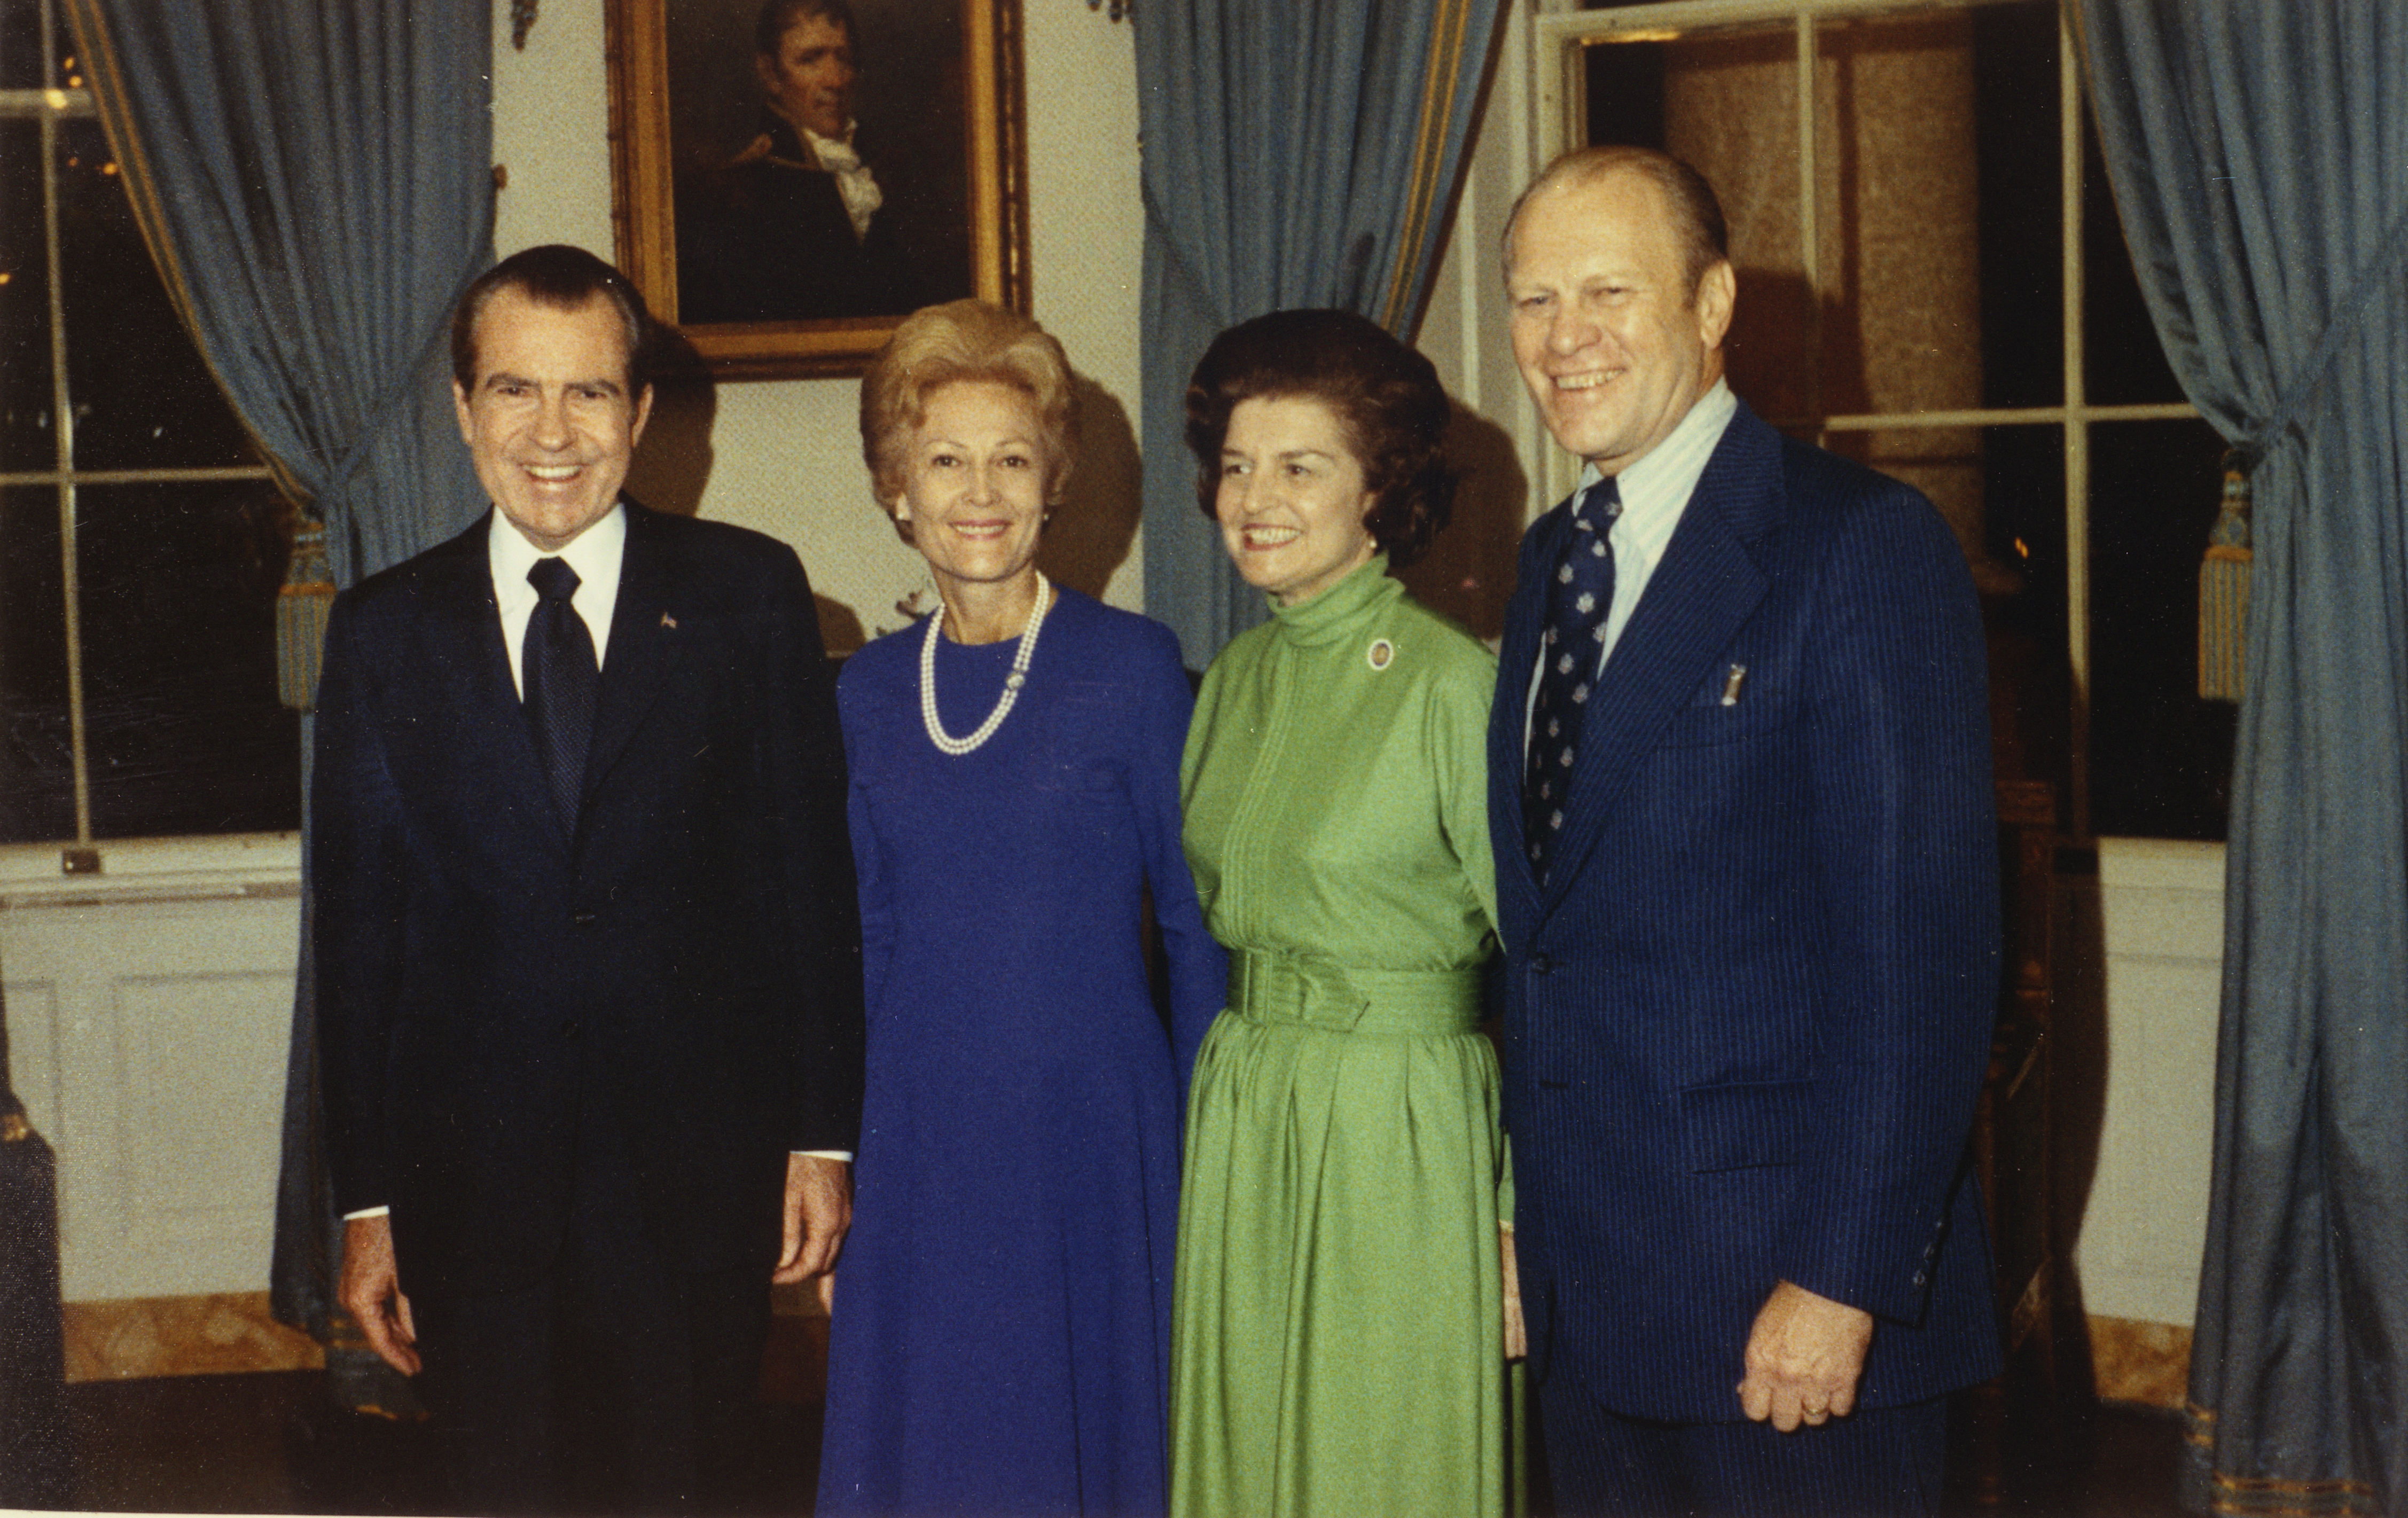 President Richard M. Nixon, First Lady Pat Nixon, Betty Ford, and Representative Gerald R. Ford in the Blue Room following the nomination of Gerald Ford as Vice President, 10/12/1973.